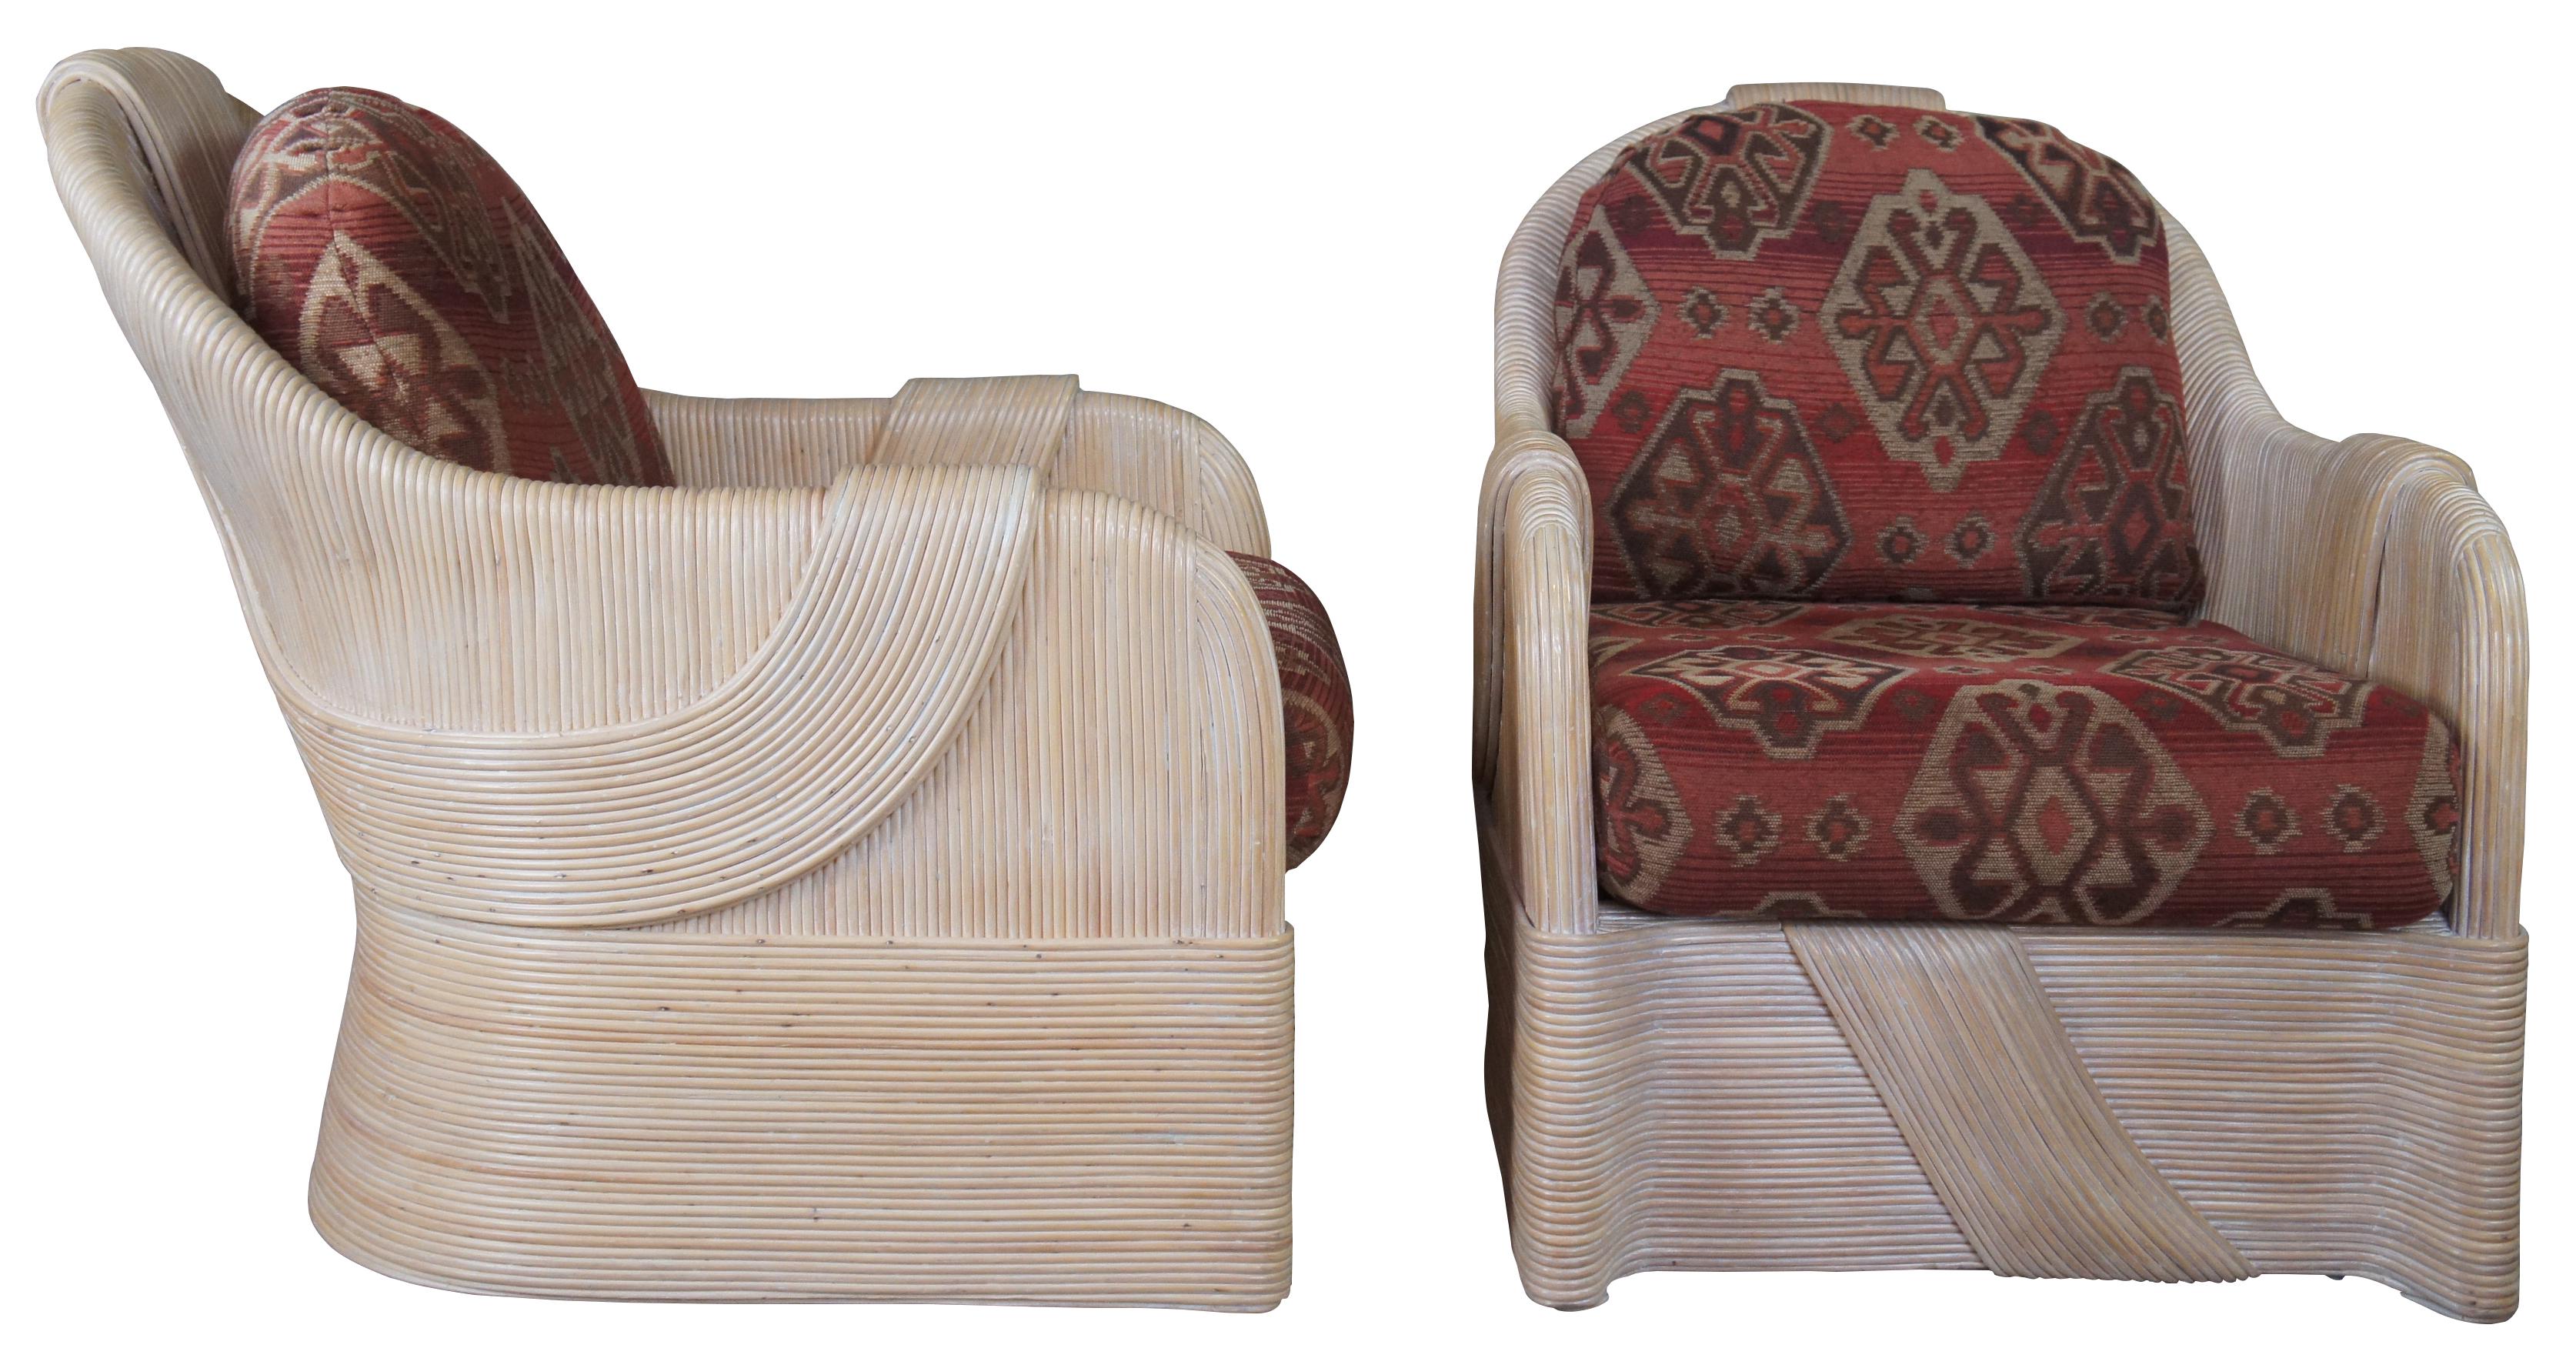 Sculptural pair of split or pencil reed club chairs. Features a red southwestern fabric.
  